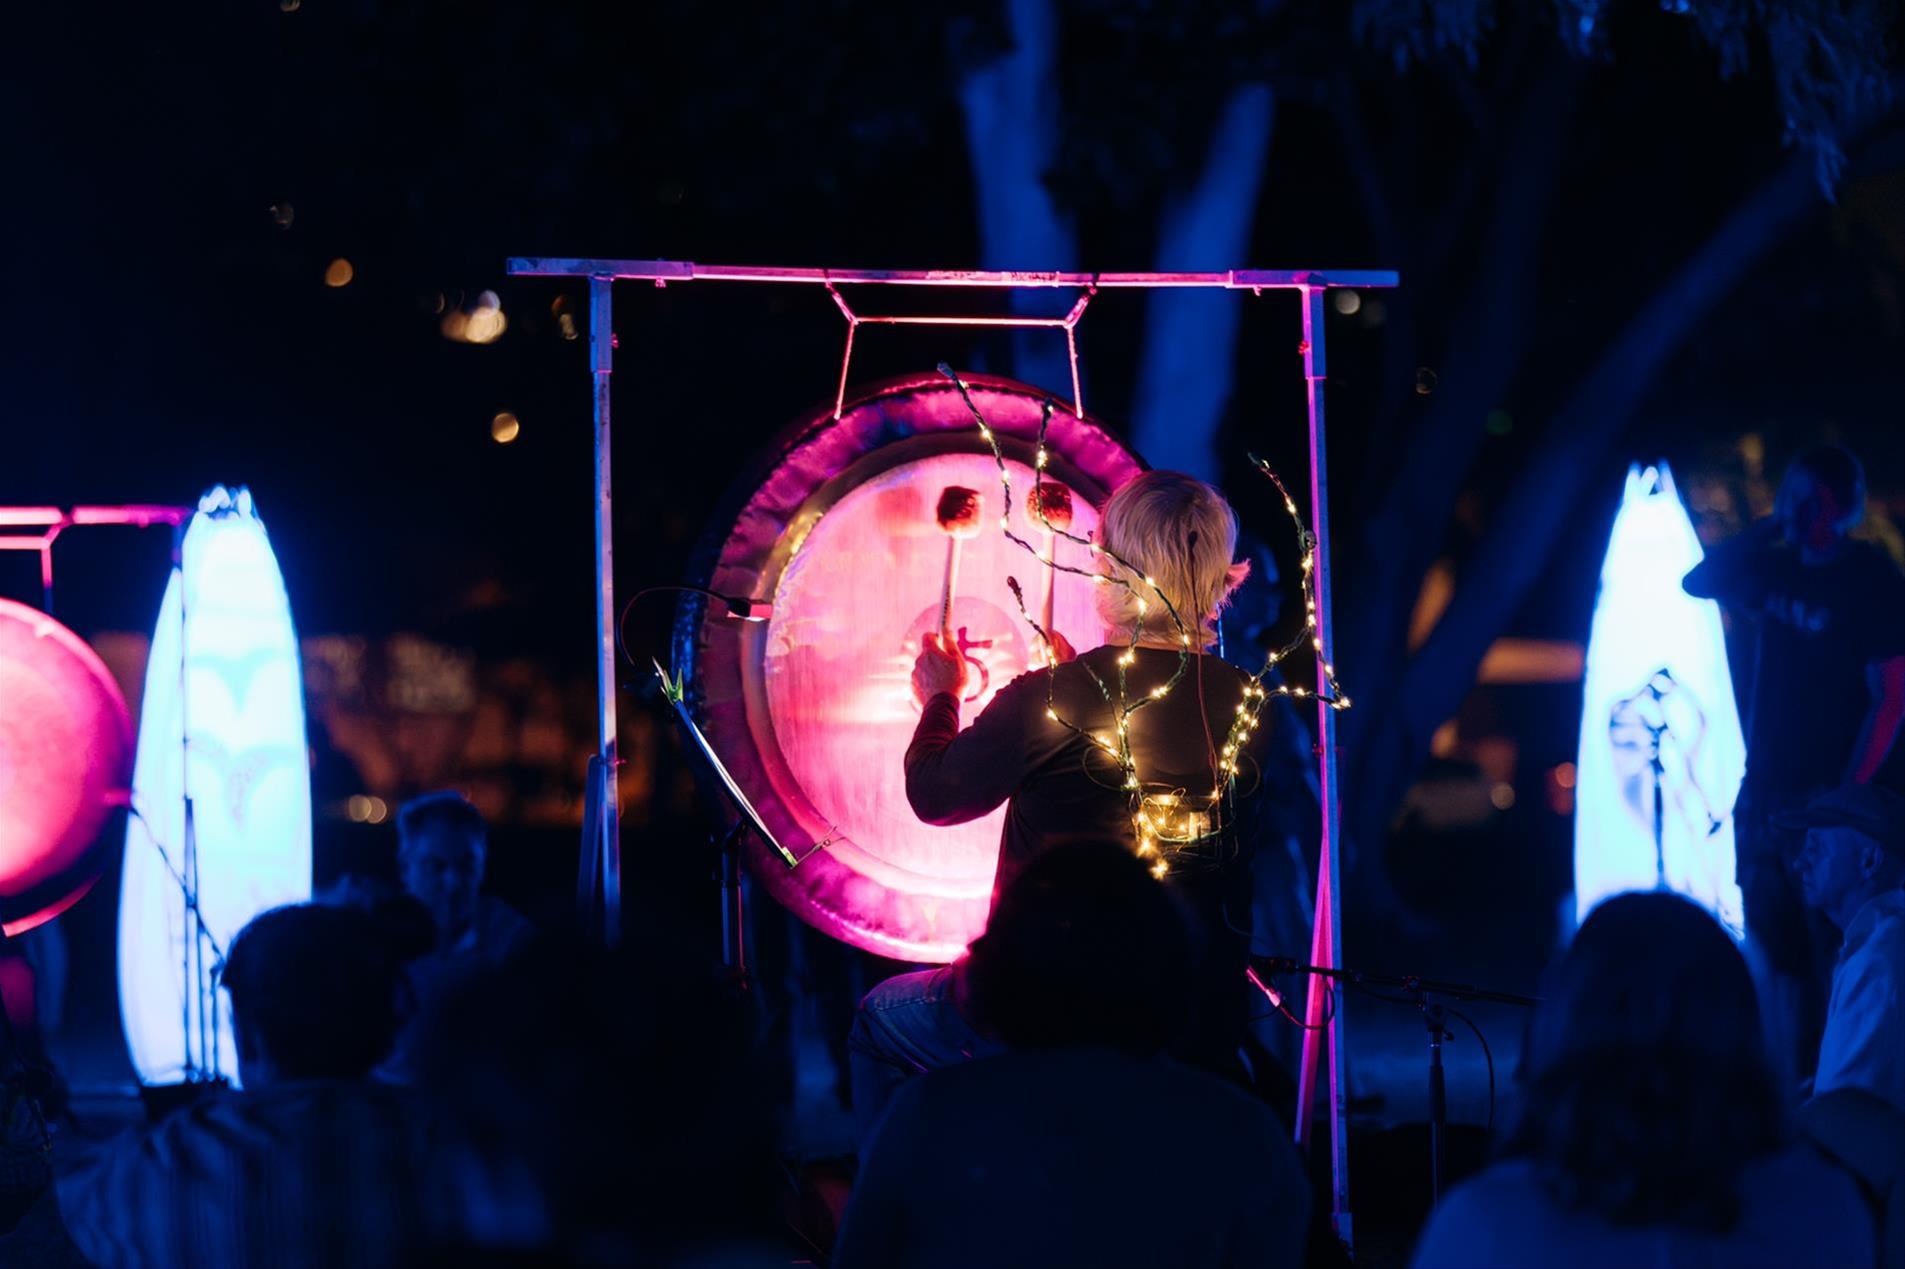 A man wearing a string of lights on his back while playing a drum.